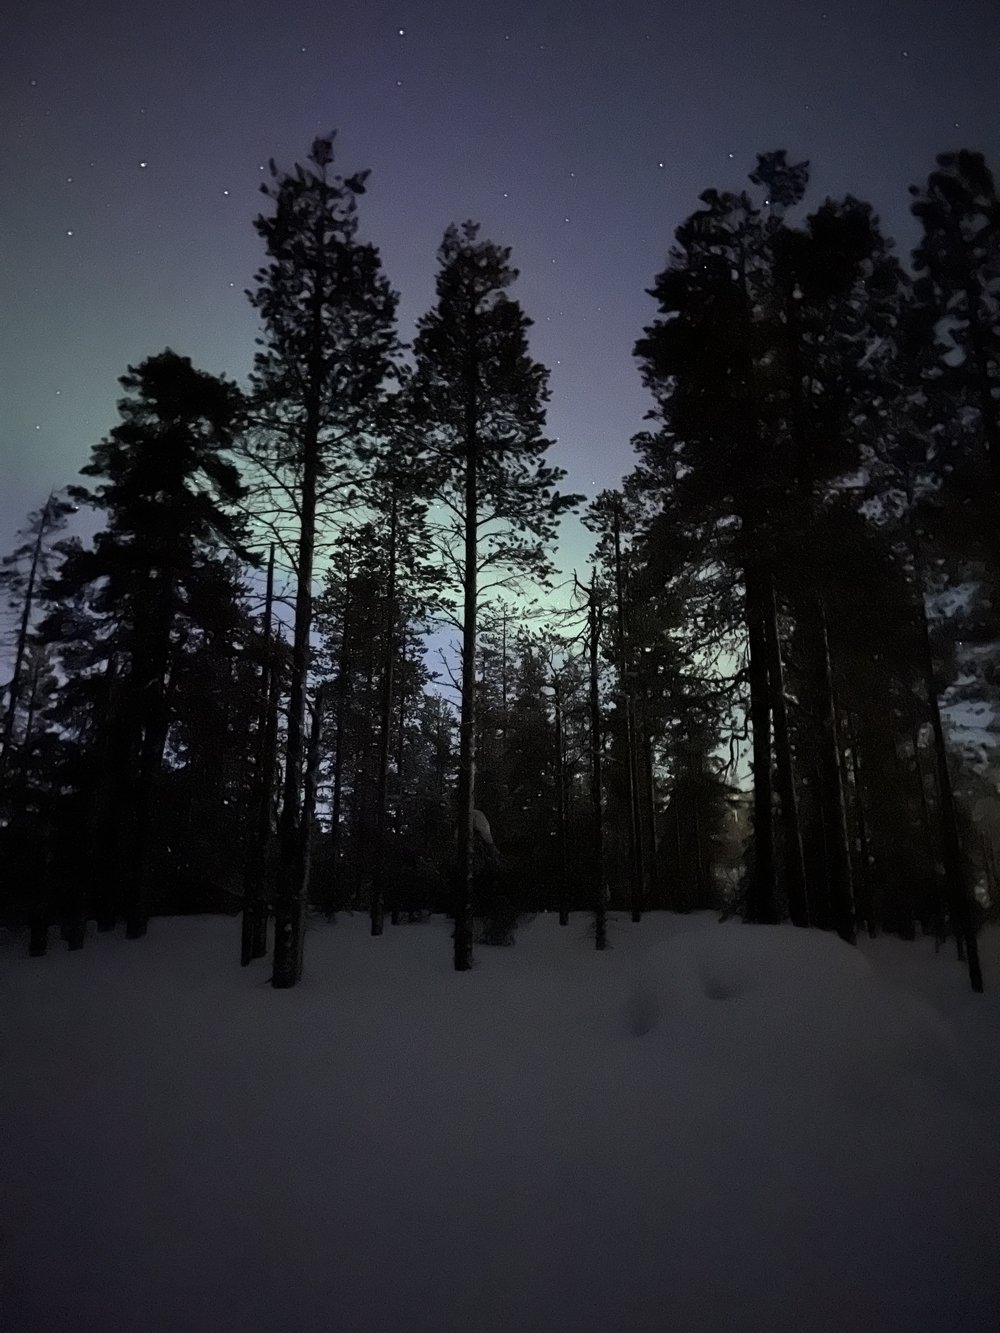  The view of the Northern Lights that same night, taken from the forest path near the hotel 